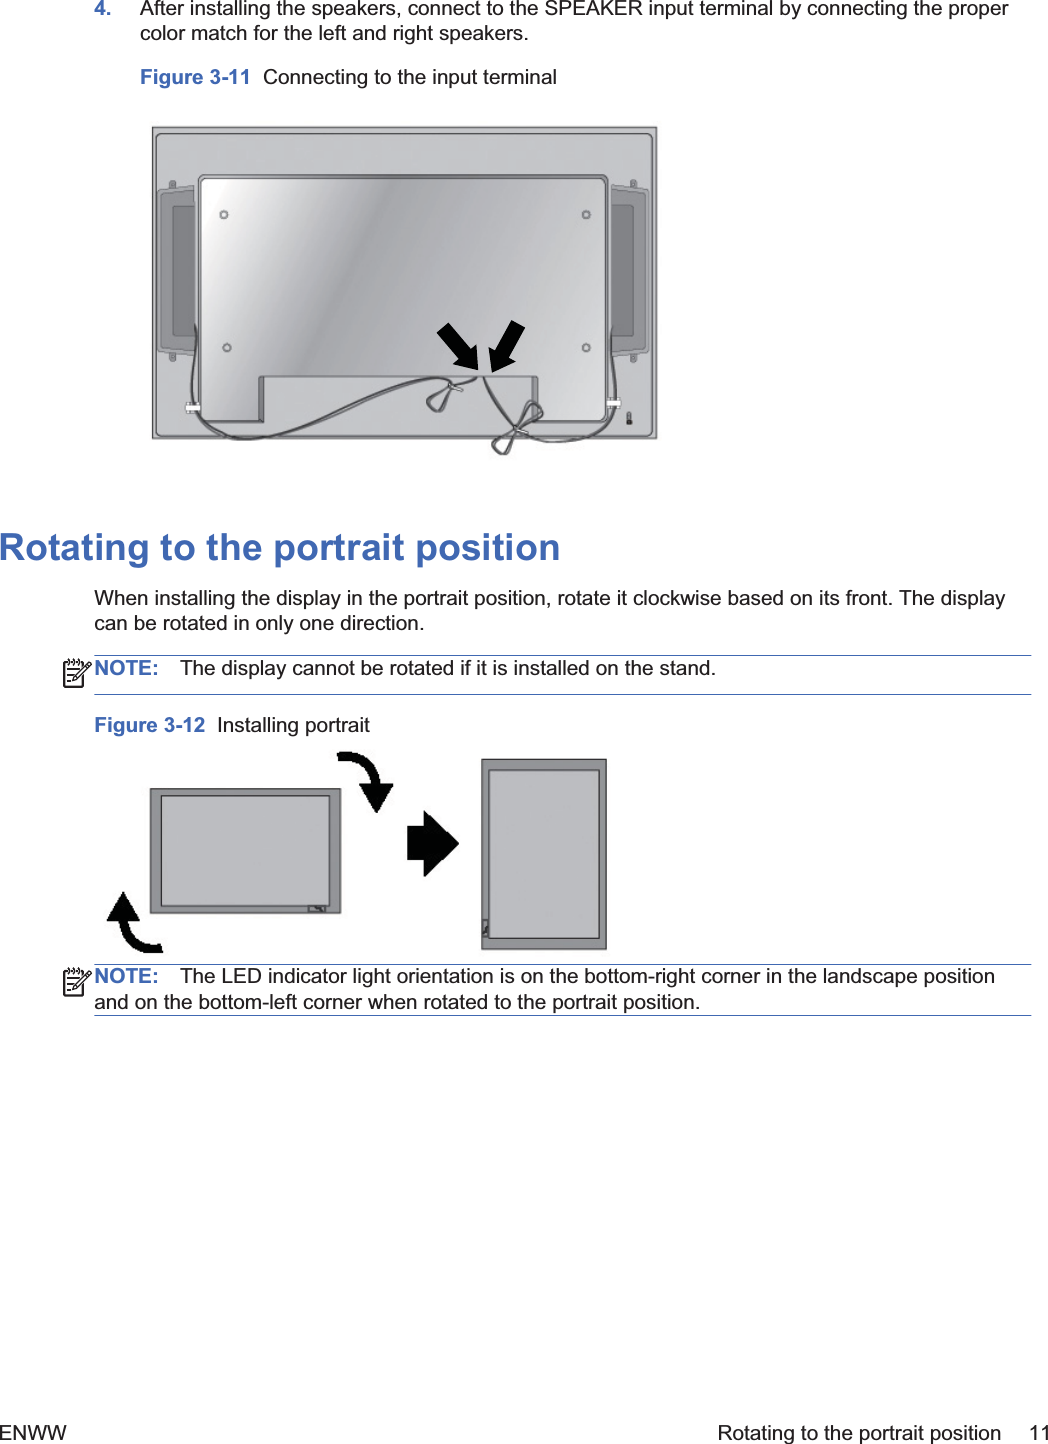 4. After installing the speakers, connect to the SPEAKER input terminal by connecting the propercolor match for the left and right speakers.Figure 3-11  Connecting to the input terminalRotating to the portrait positionWhen installing the display in the portrait position, rotate it clockwise based on its front. The displaycan be rotated in only one direction.NOTE: The display cannot be rotated if it is installed on the stand.Figure 3-12  Installing portraitNOTE: The LED indicator light orientation is on the bottom-right corner in the landscape positionand on the bottom-left corner when rotated to the portrait position.ENWW Rotating to the portrait position 11